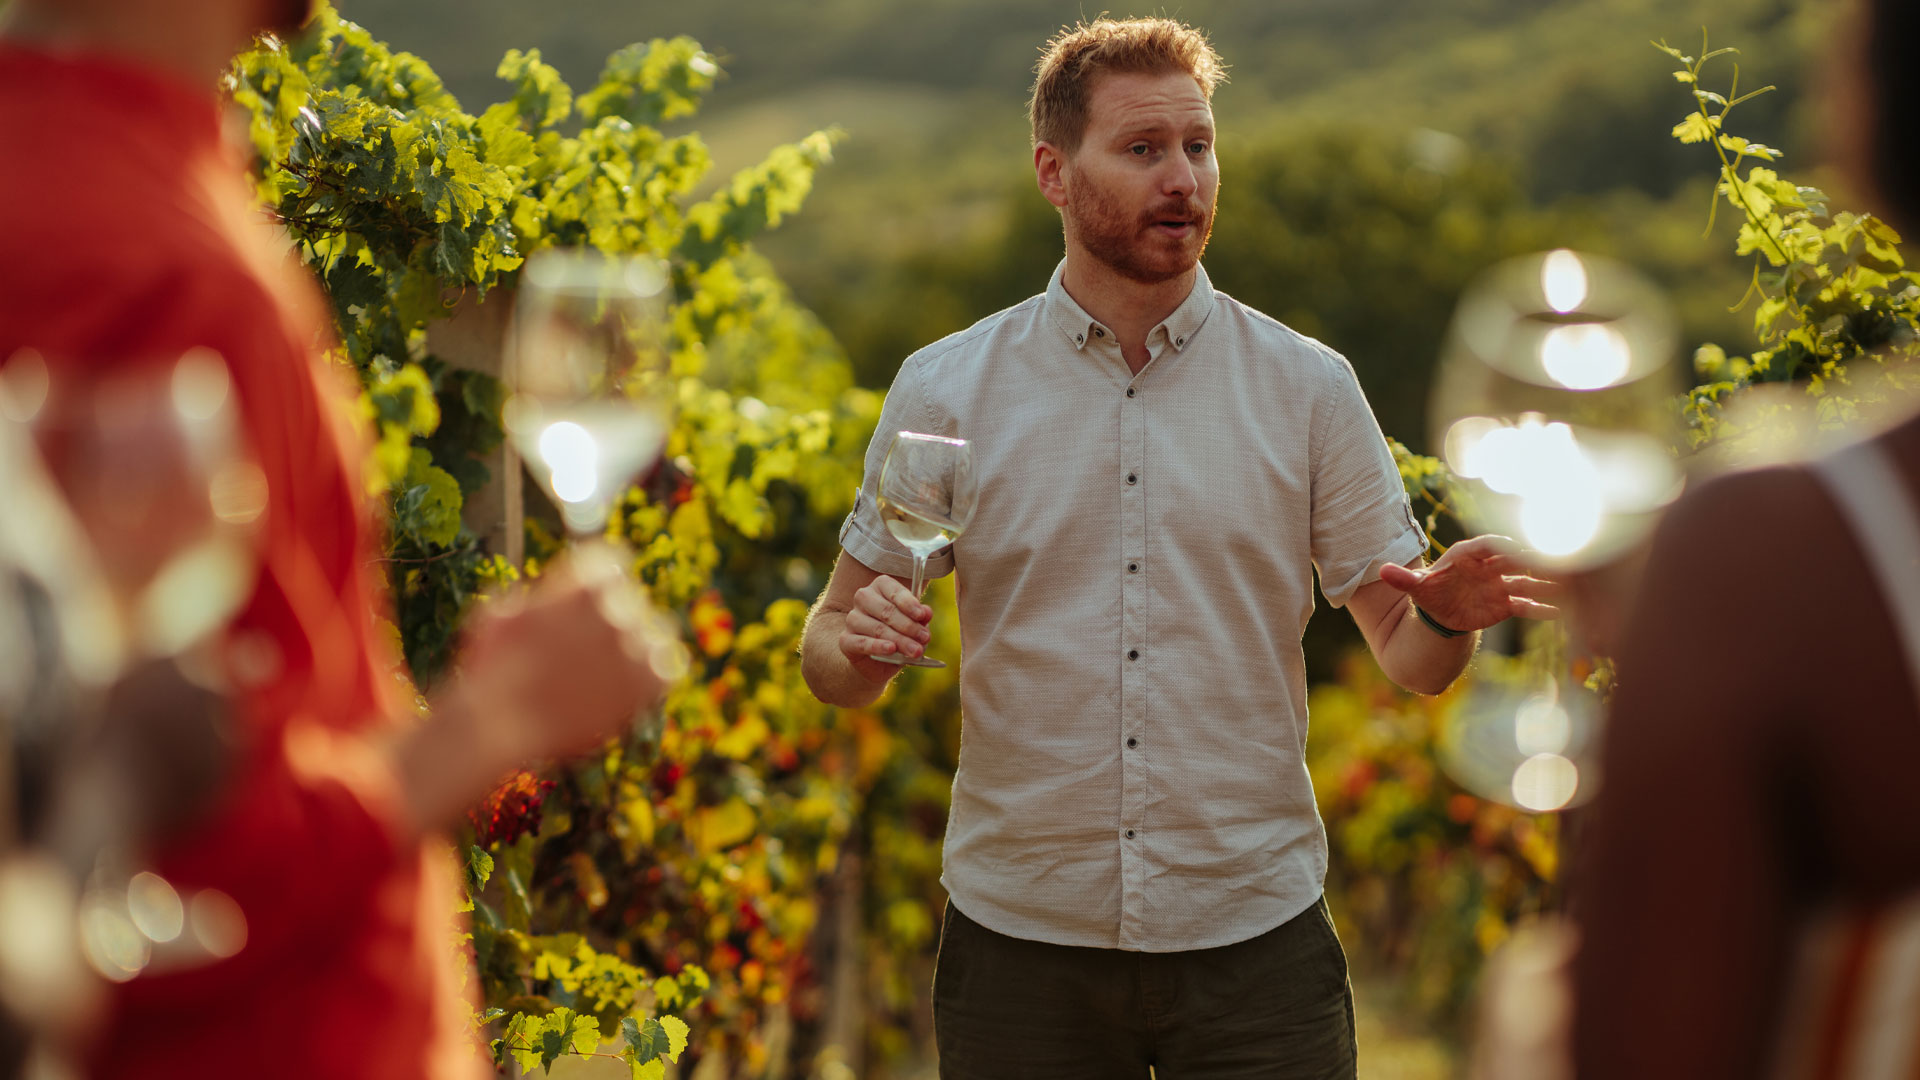 Employee at a vineyard in NZ giving a wine tour to customers.